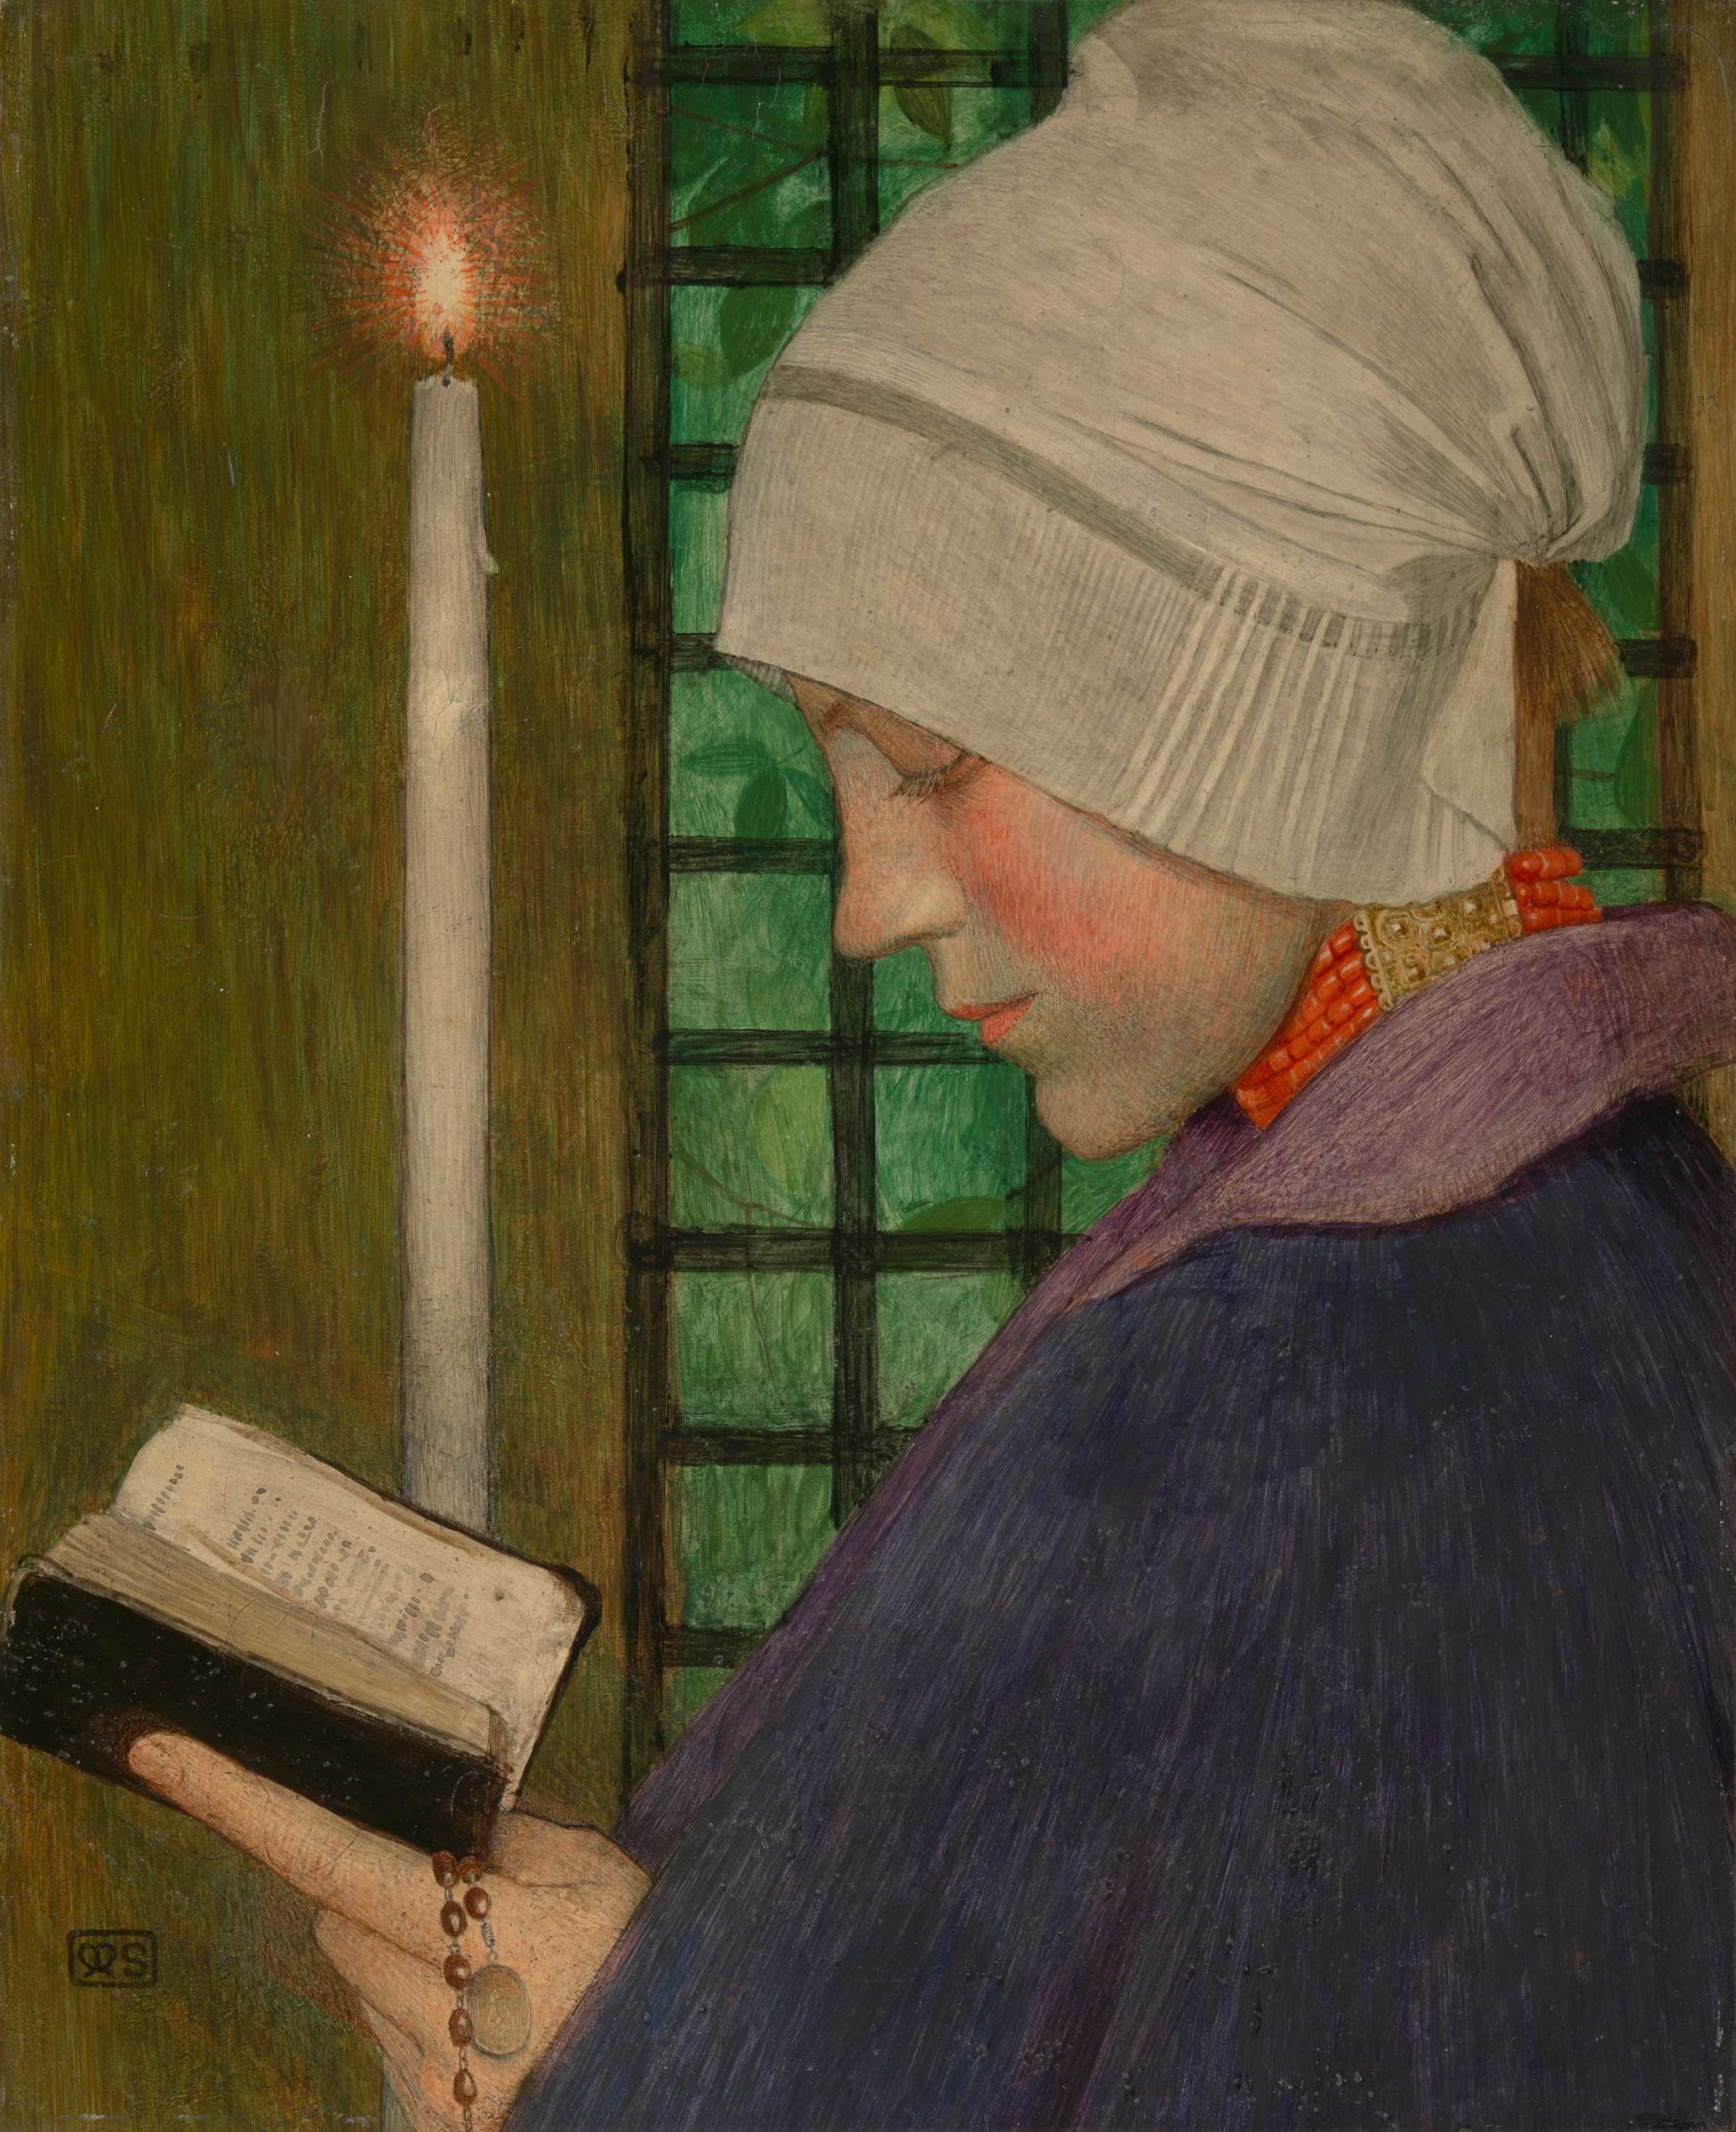 Marianne Stokes, "Candlemas Day," c.1901, tempera on wood, Tate